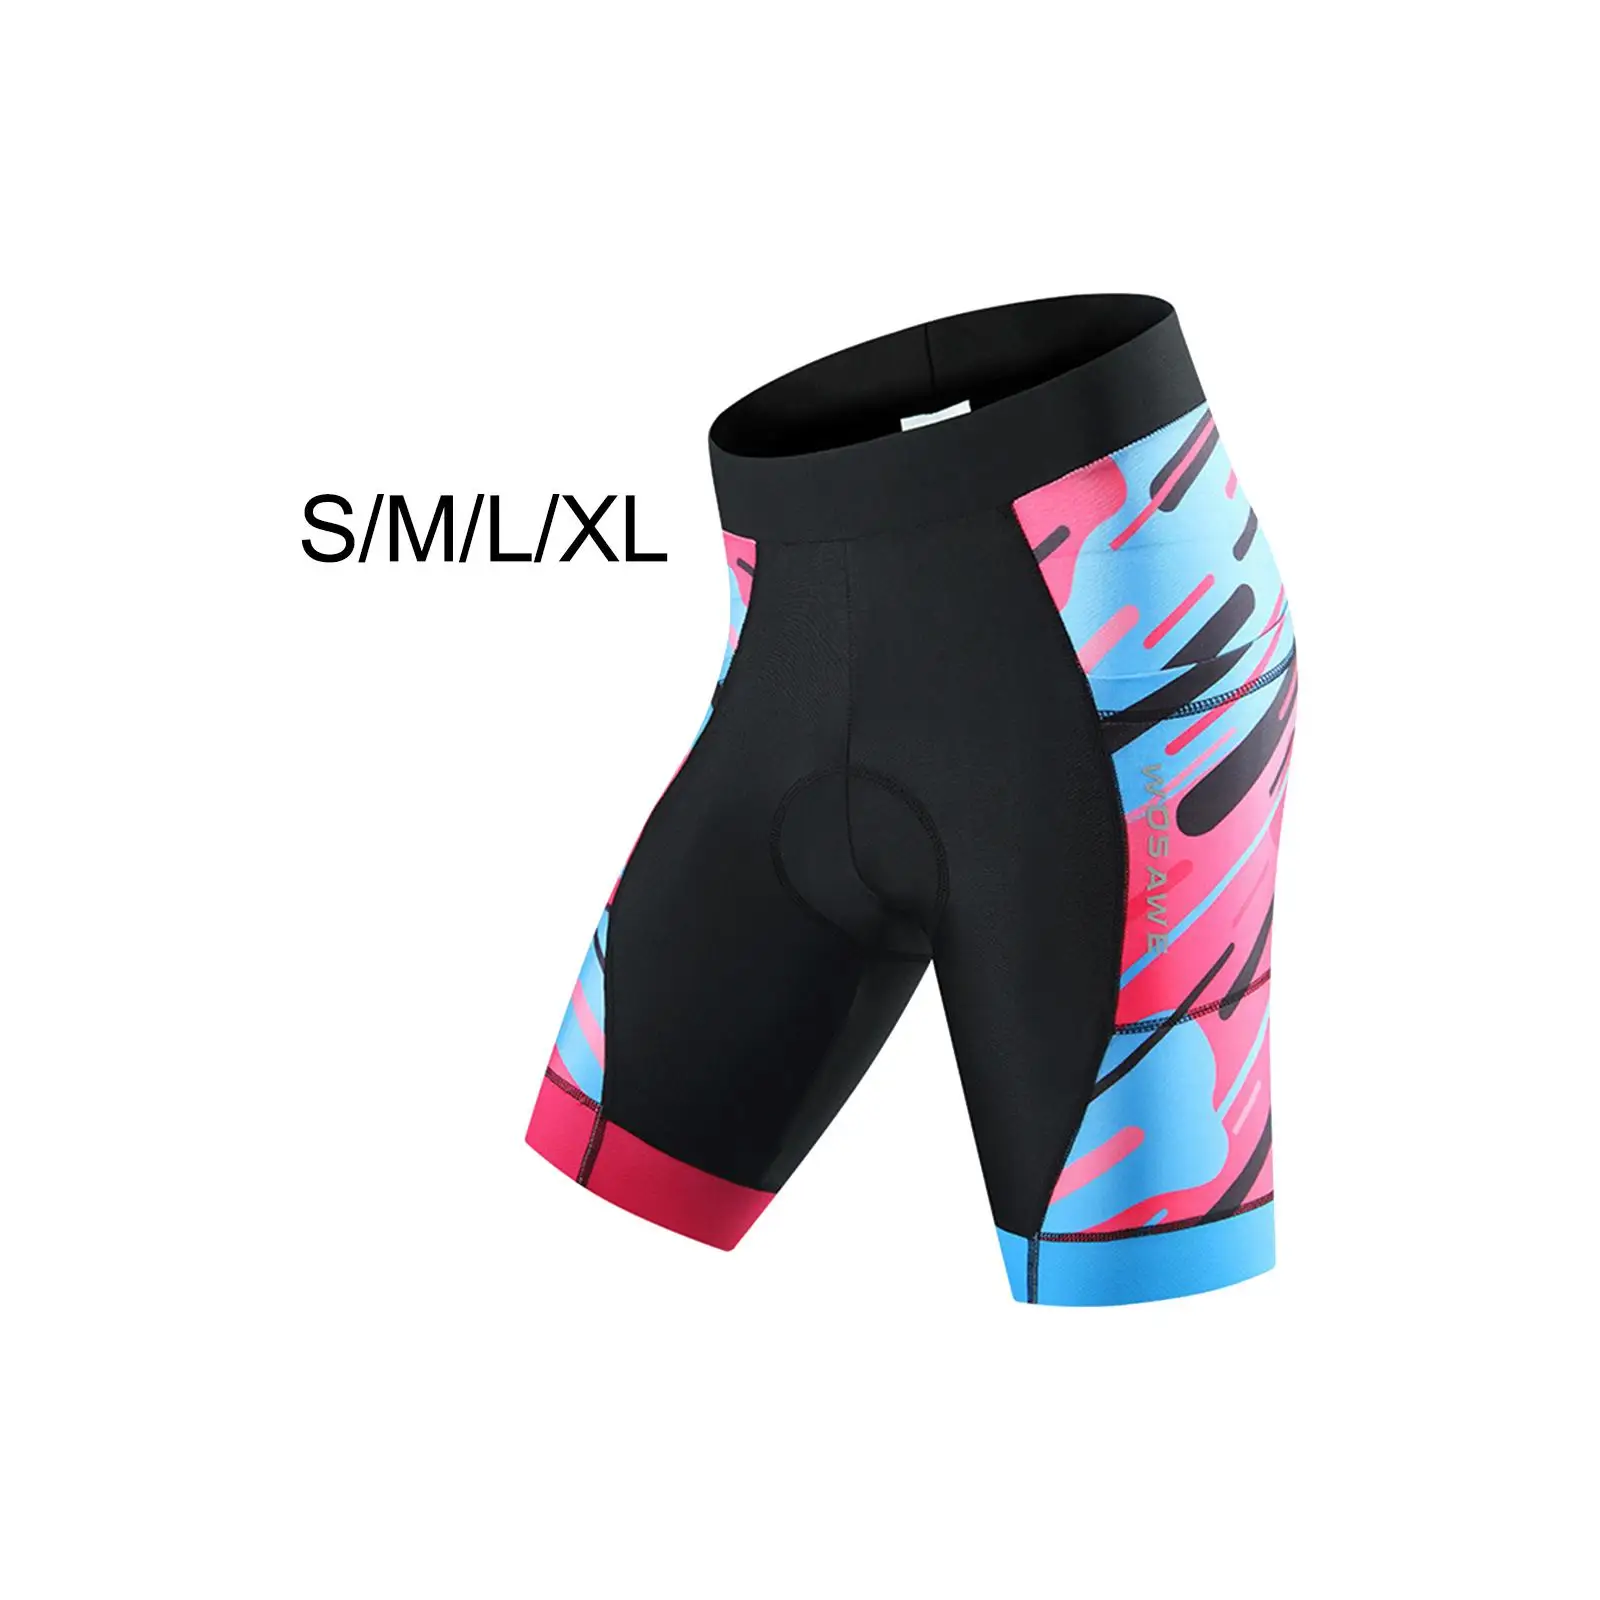 Women Bike Underpants Stretchy Padded Bike Shorts for Yoga Volleyball